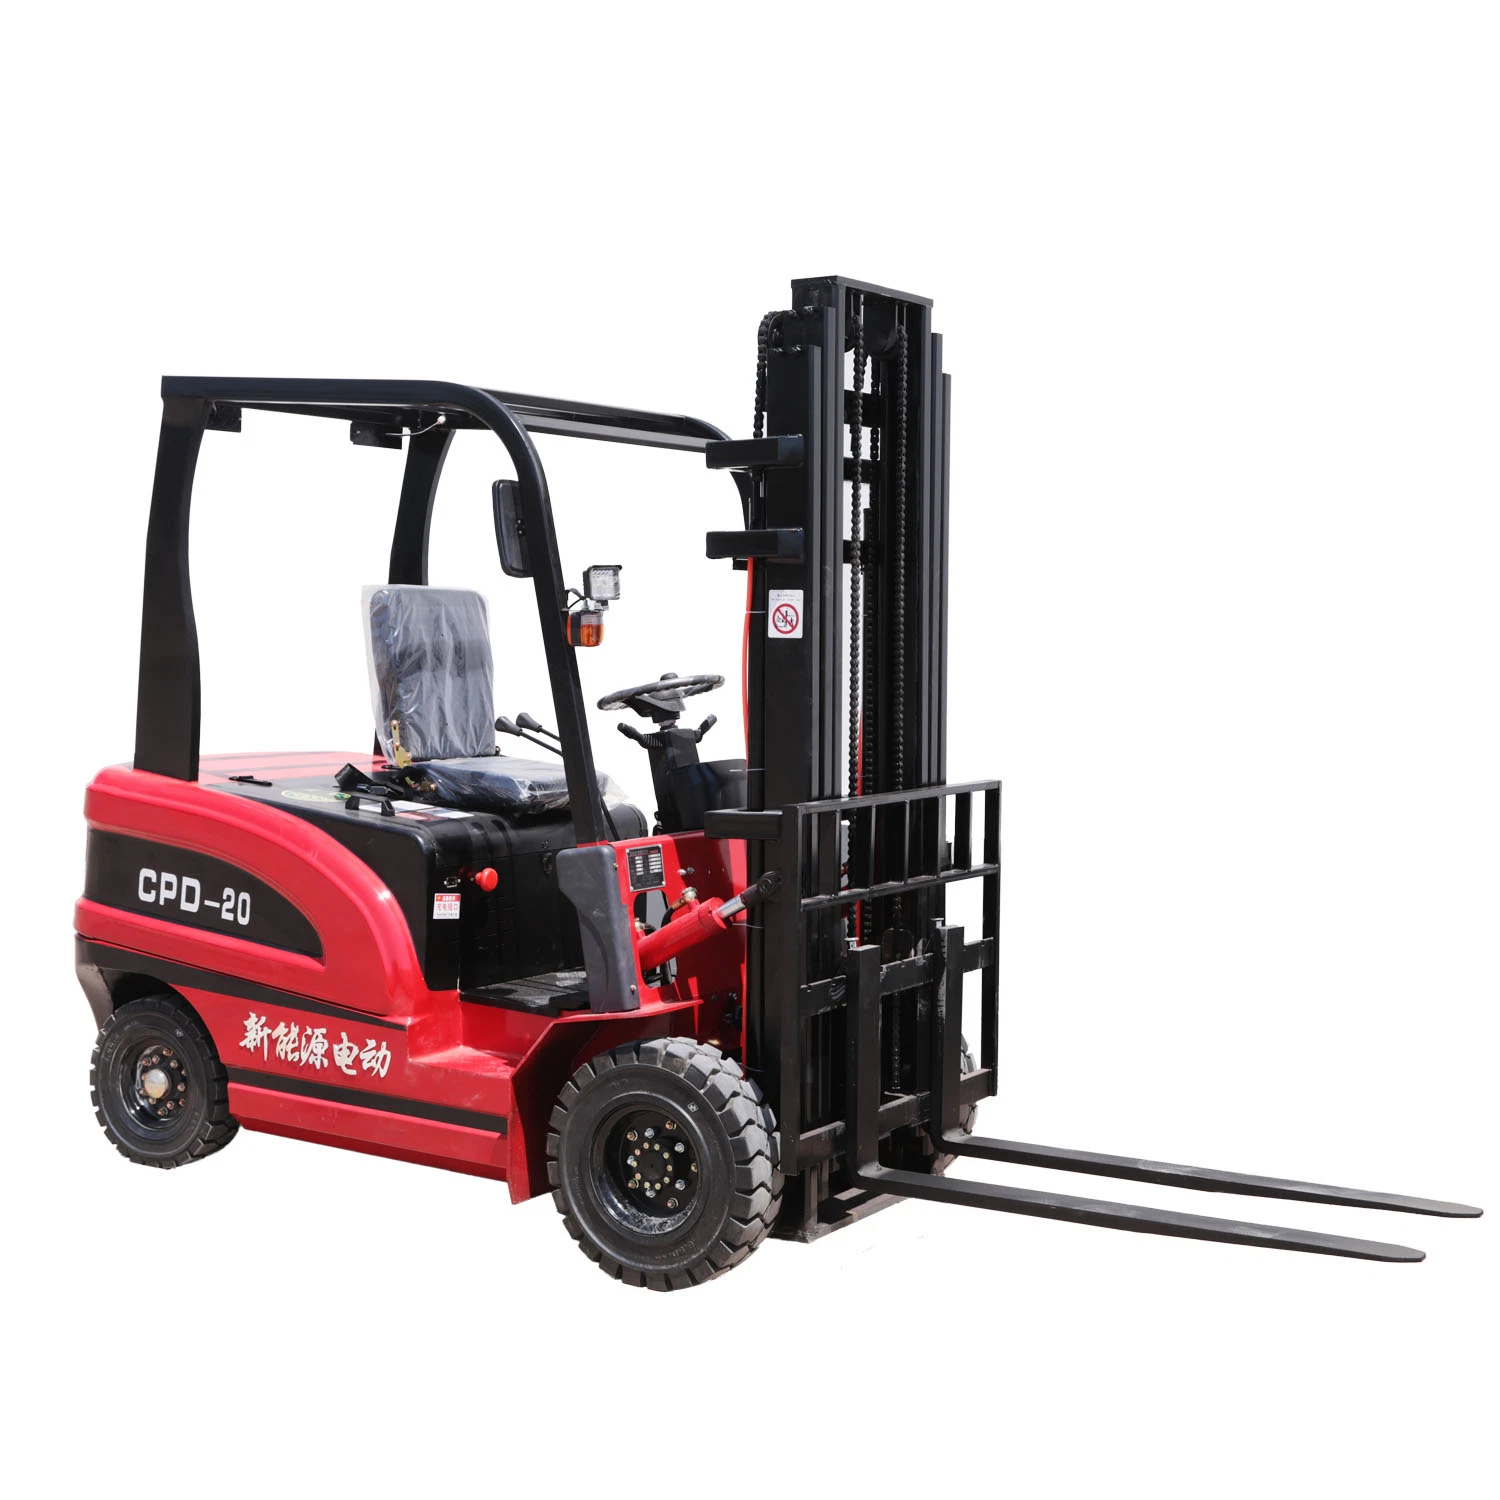 1000kg 2000kg 3000kg Brand New Low Price Lightweight Counterbalance Quality Industrial Hot Sale Electric Forklift with Attachment